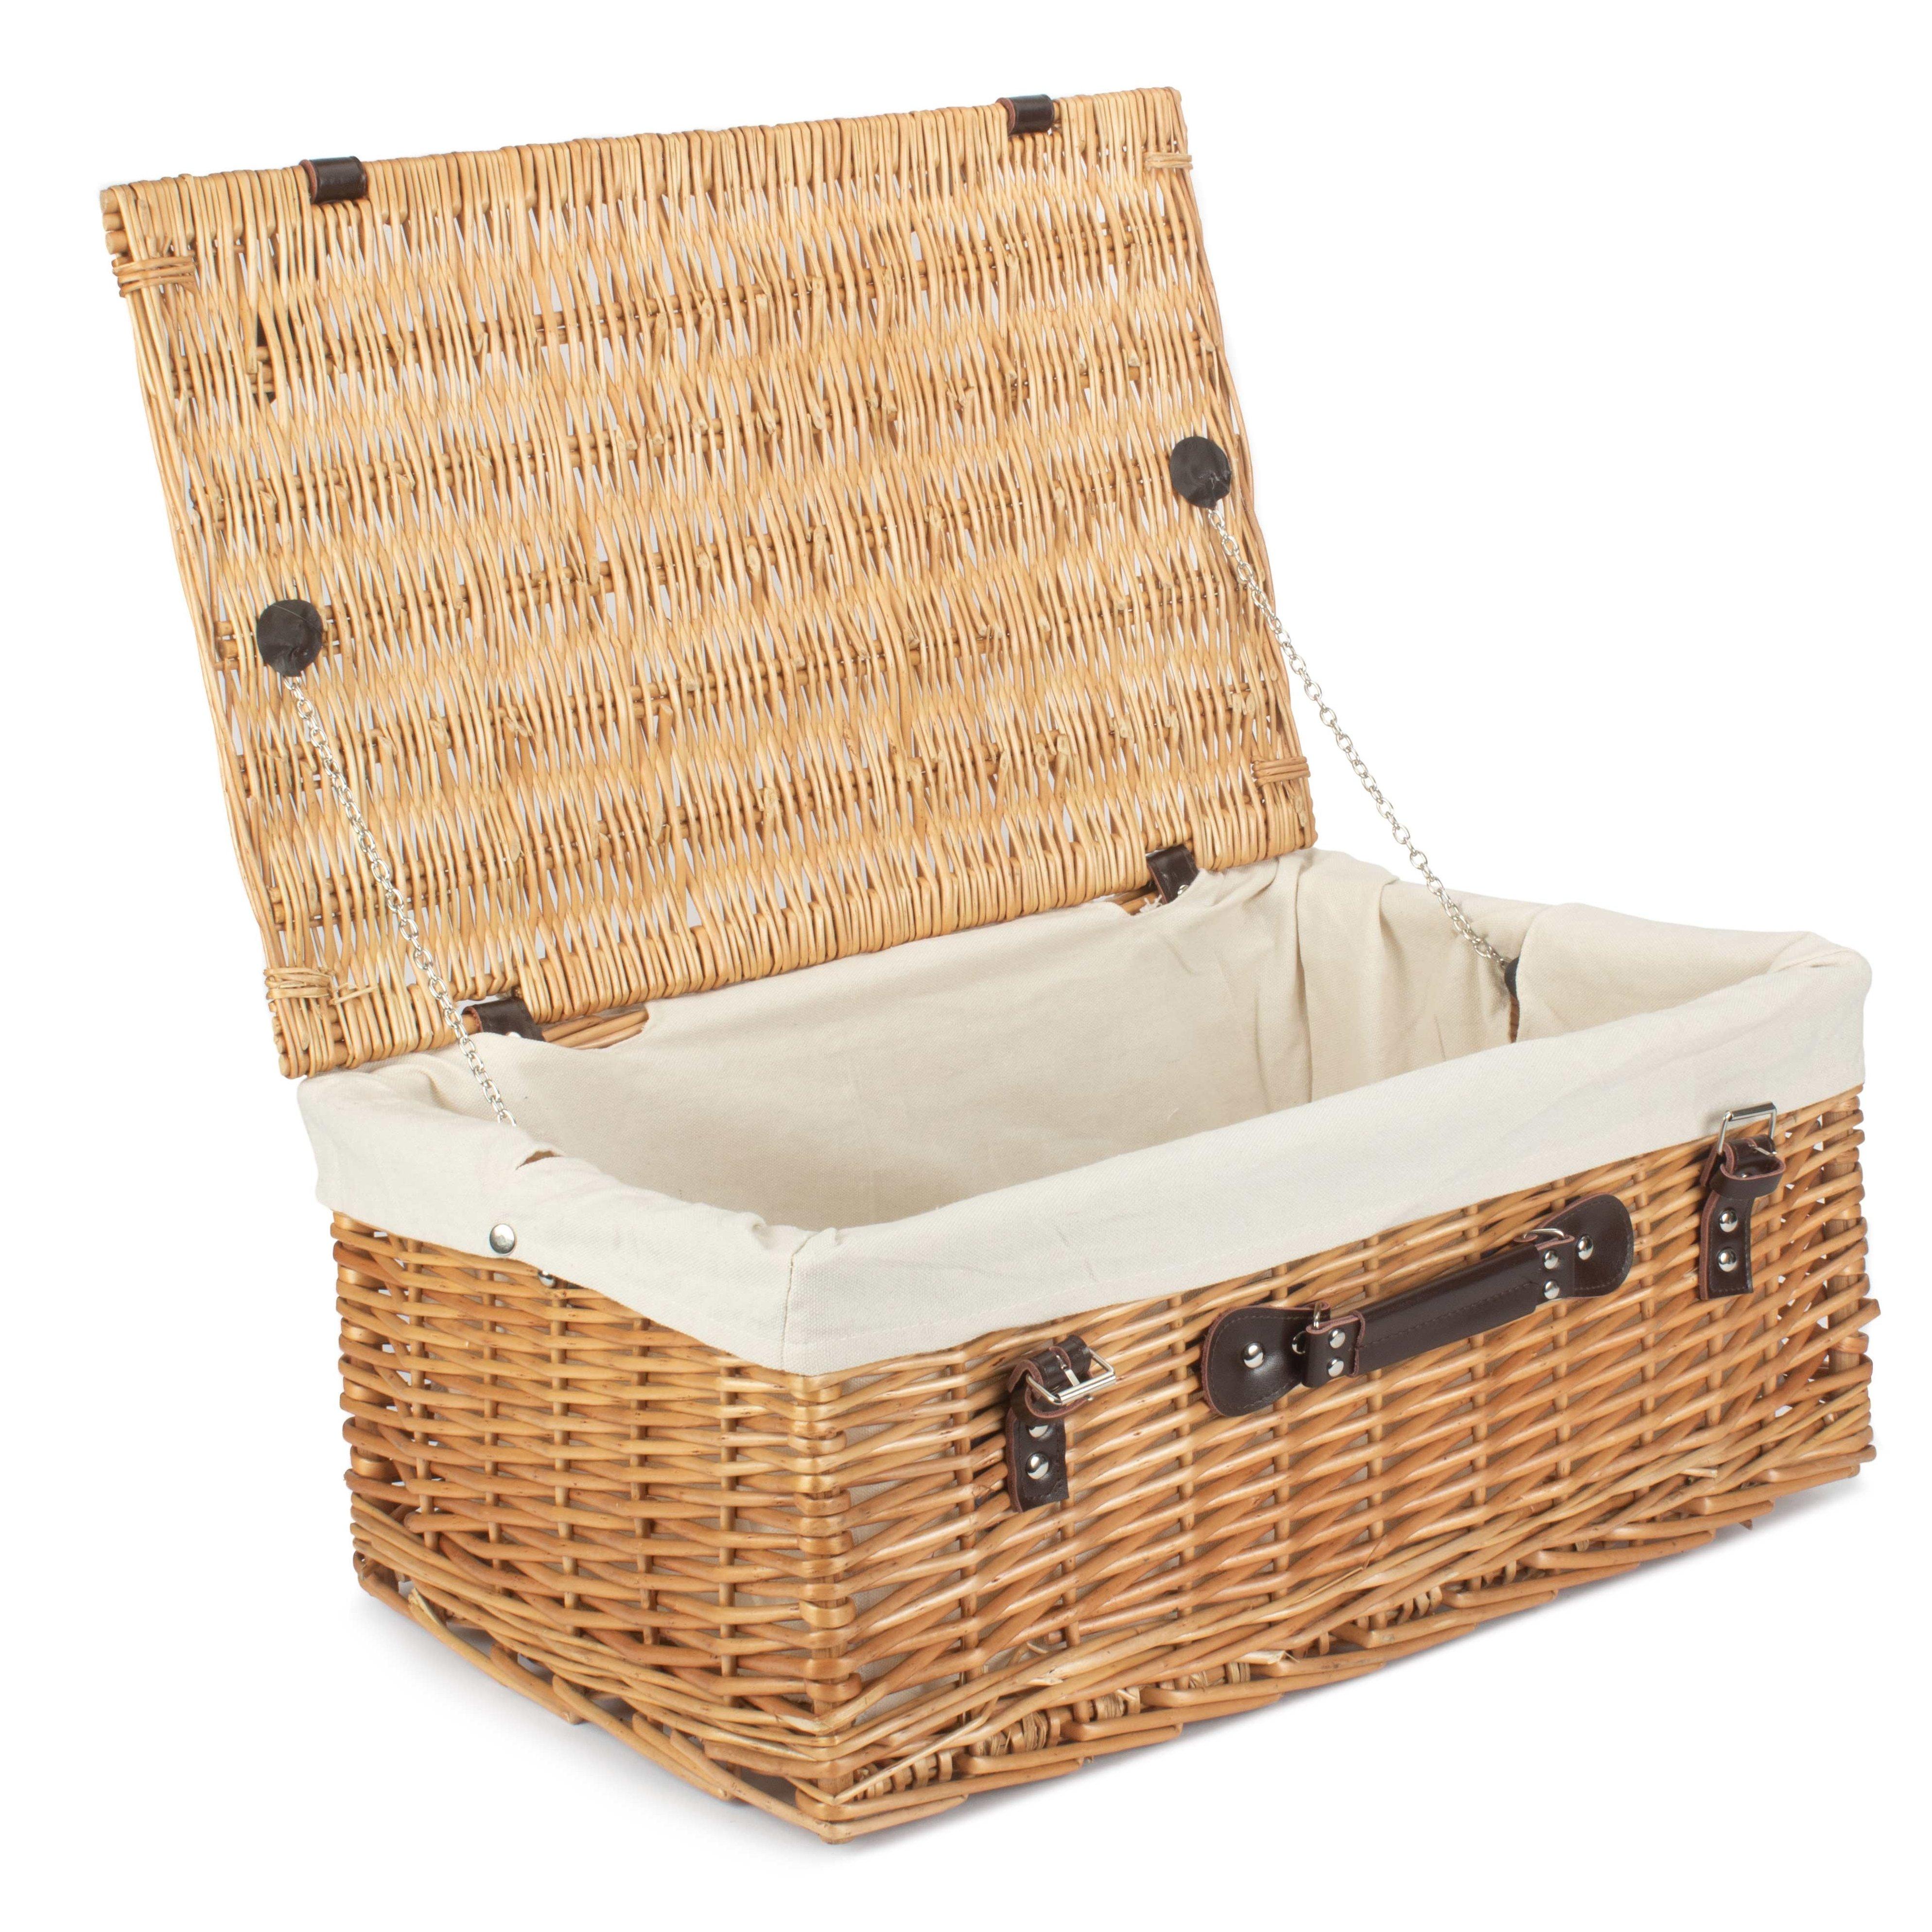 Wicker 55cm Buff Picnic Basket with Cotton Lining